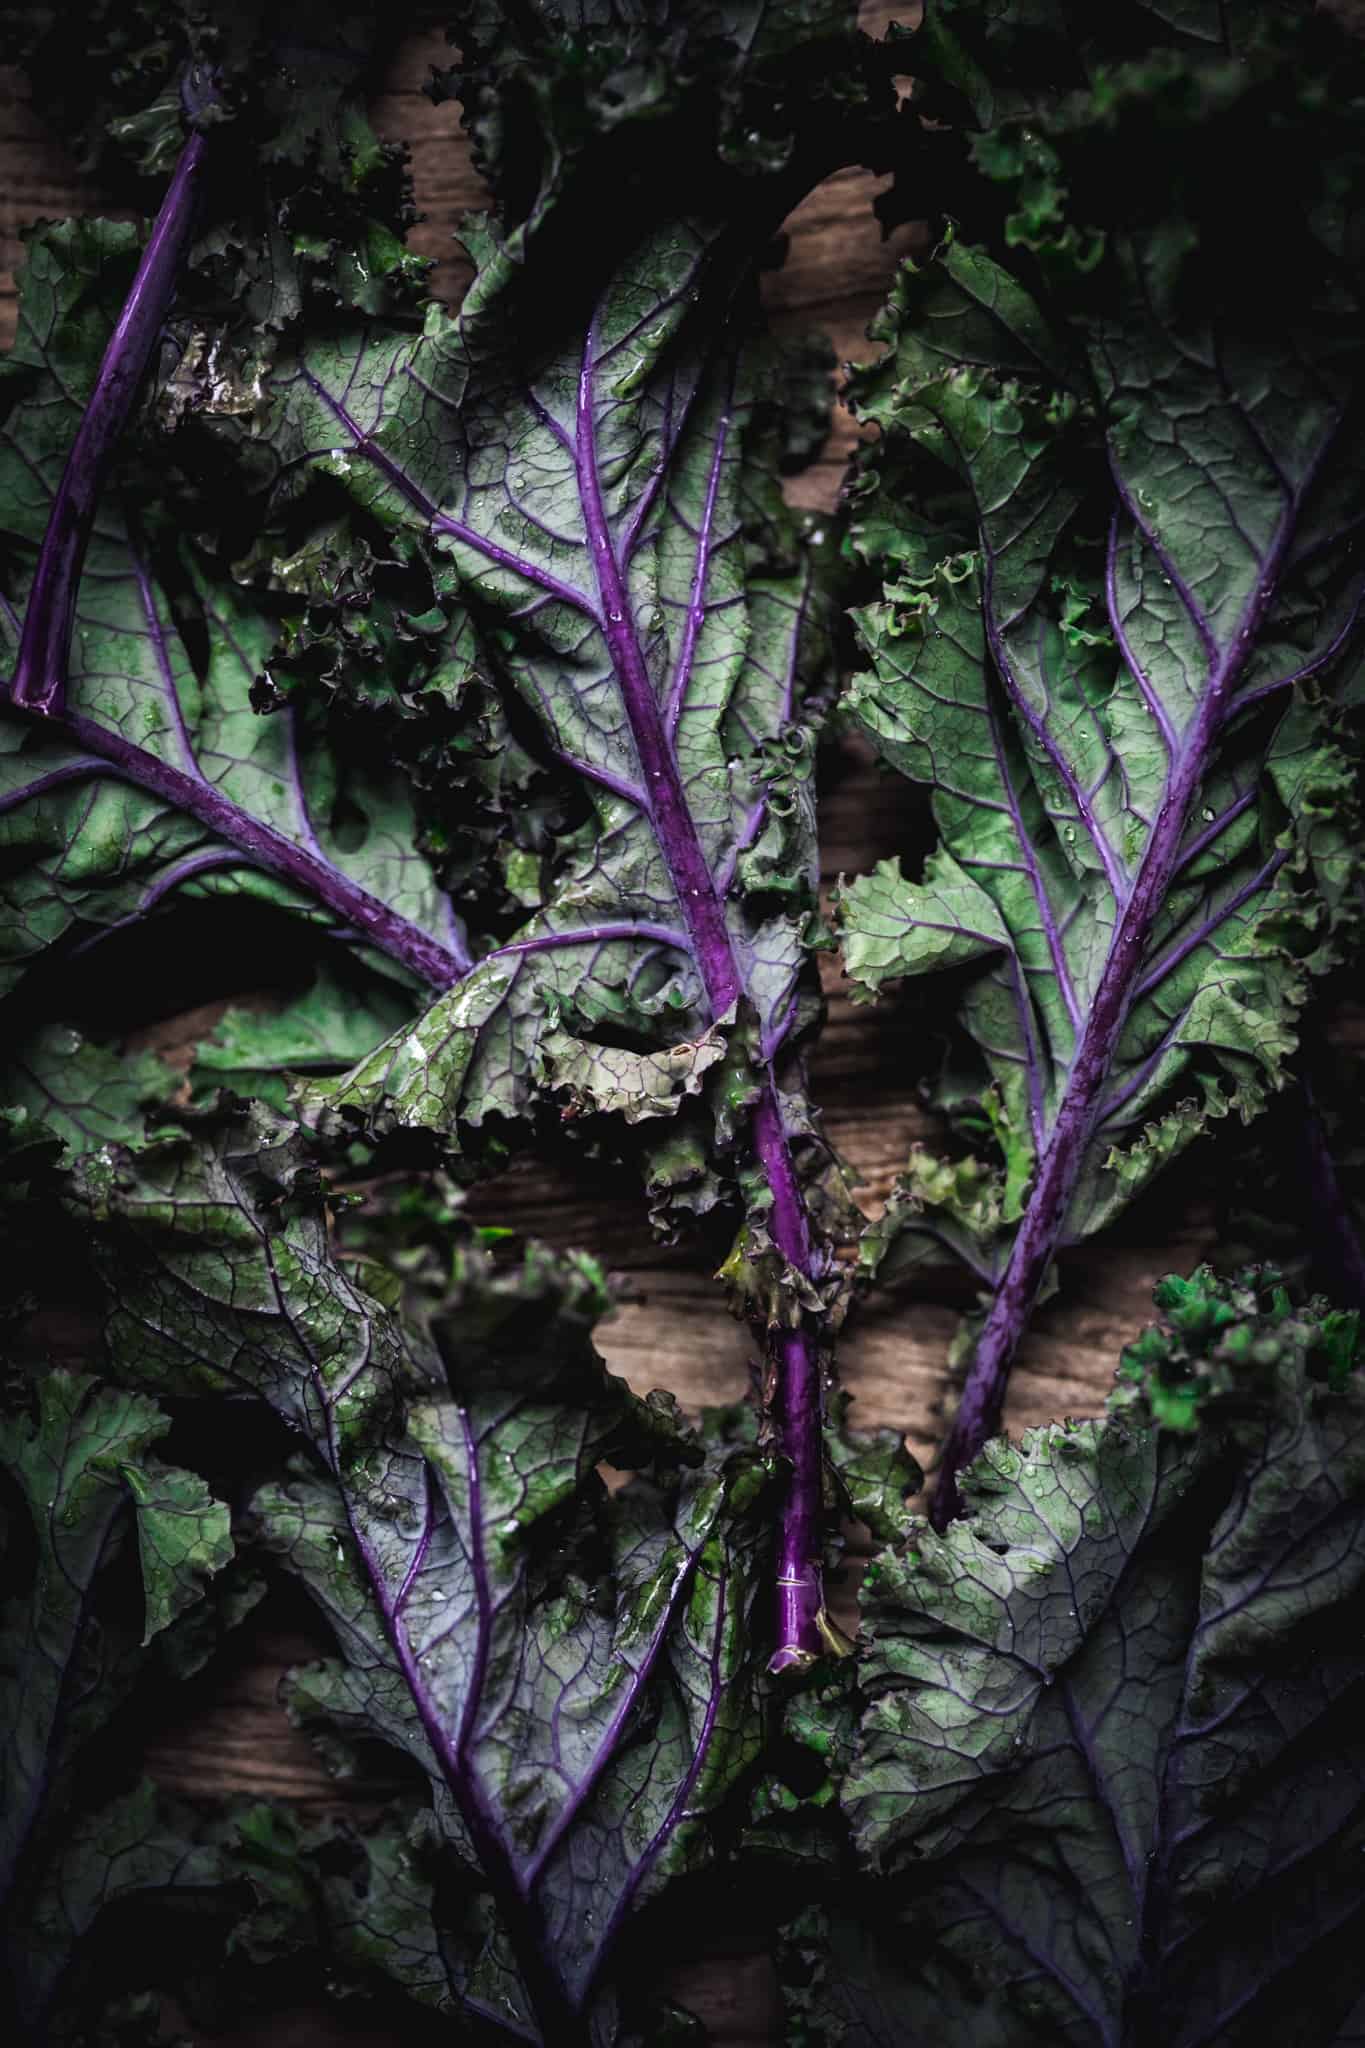 Close up moody photo of purple curly kale with water droplets